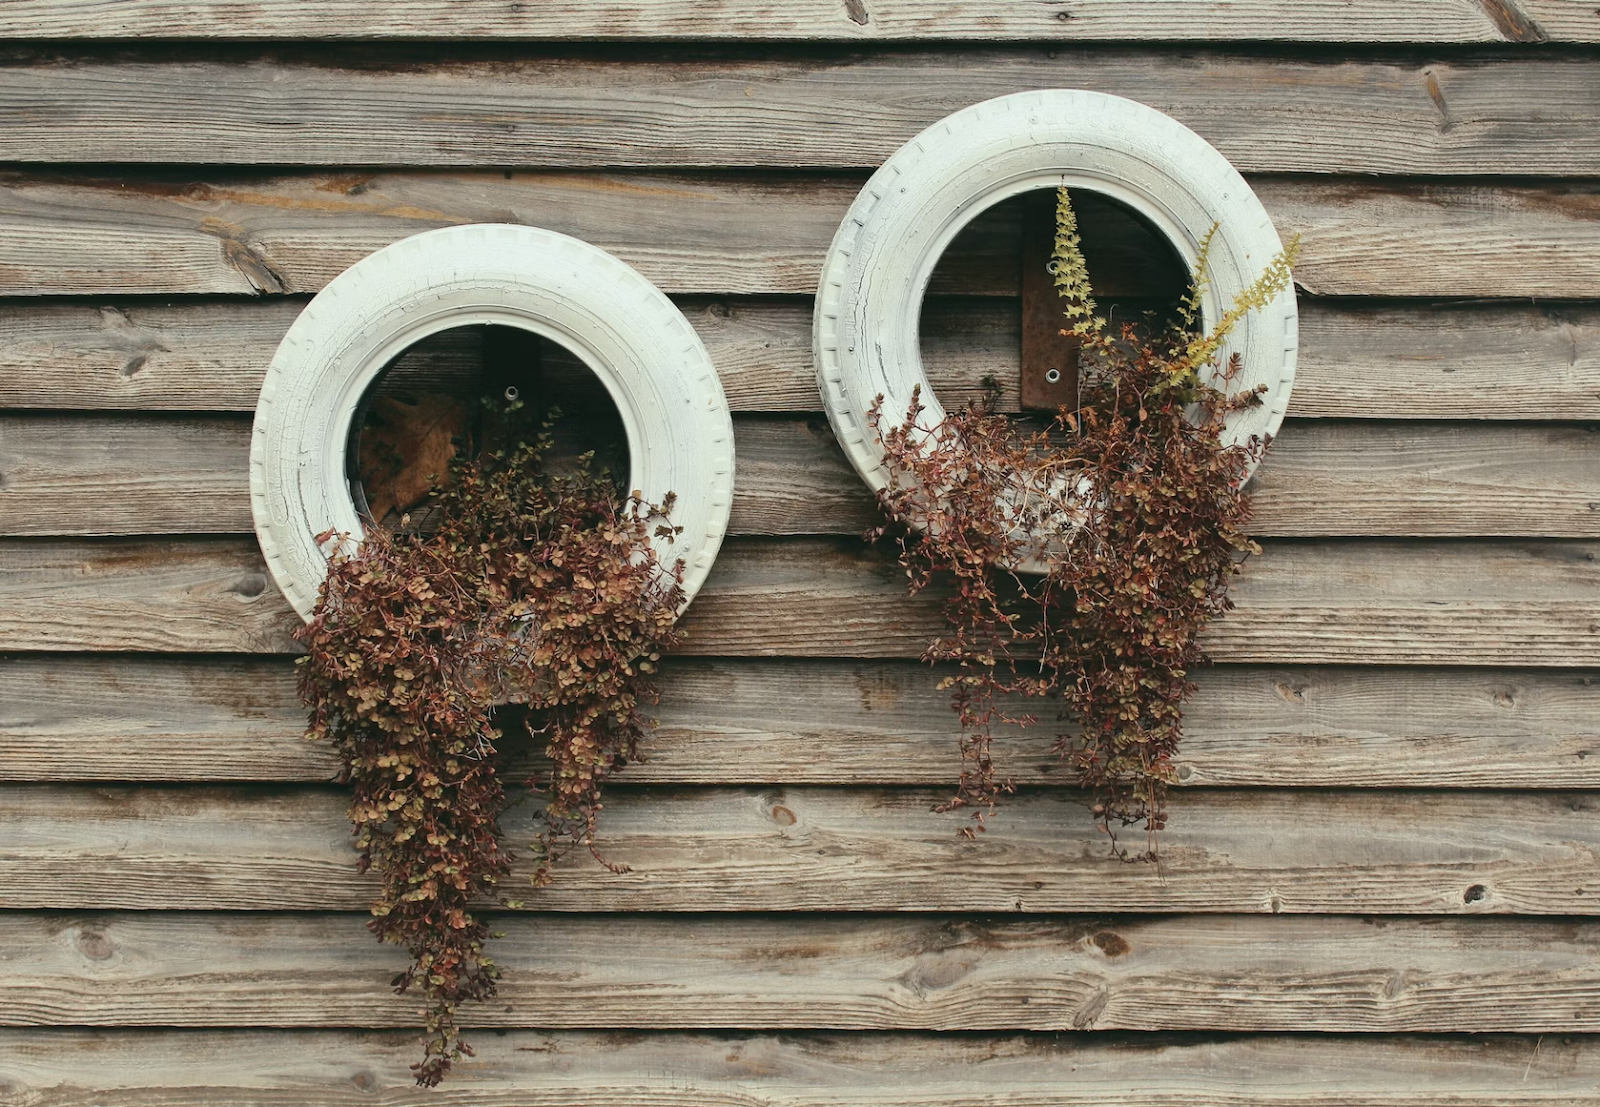 Upcycled white tires with plants mounted on a wooden paneled wall